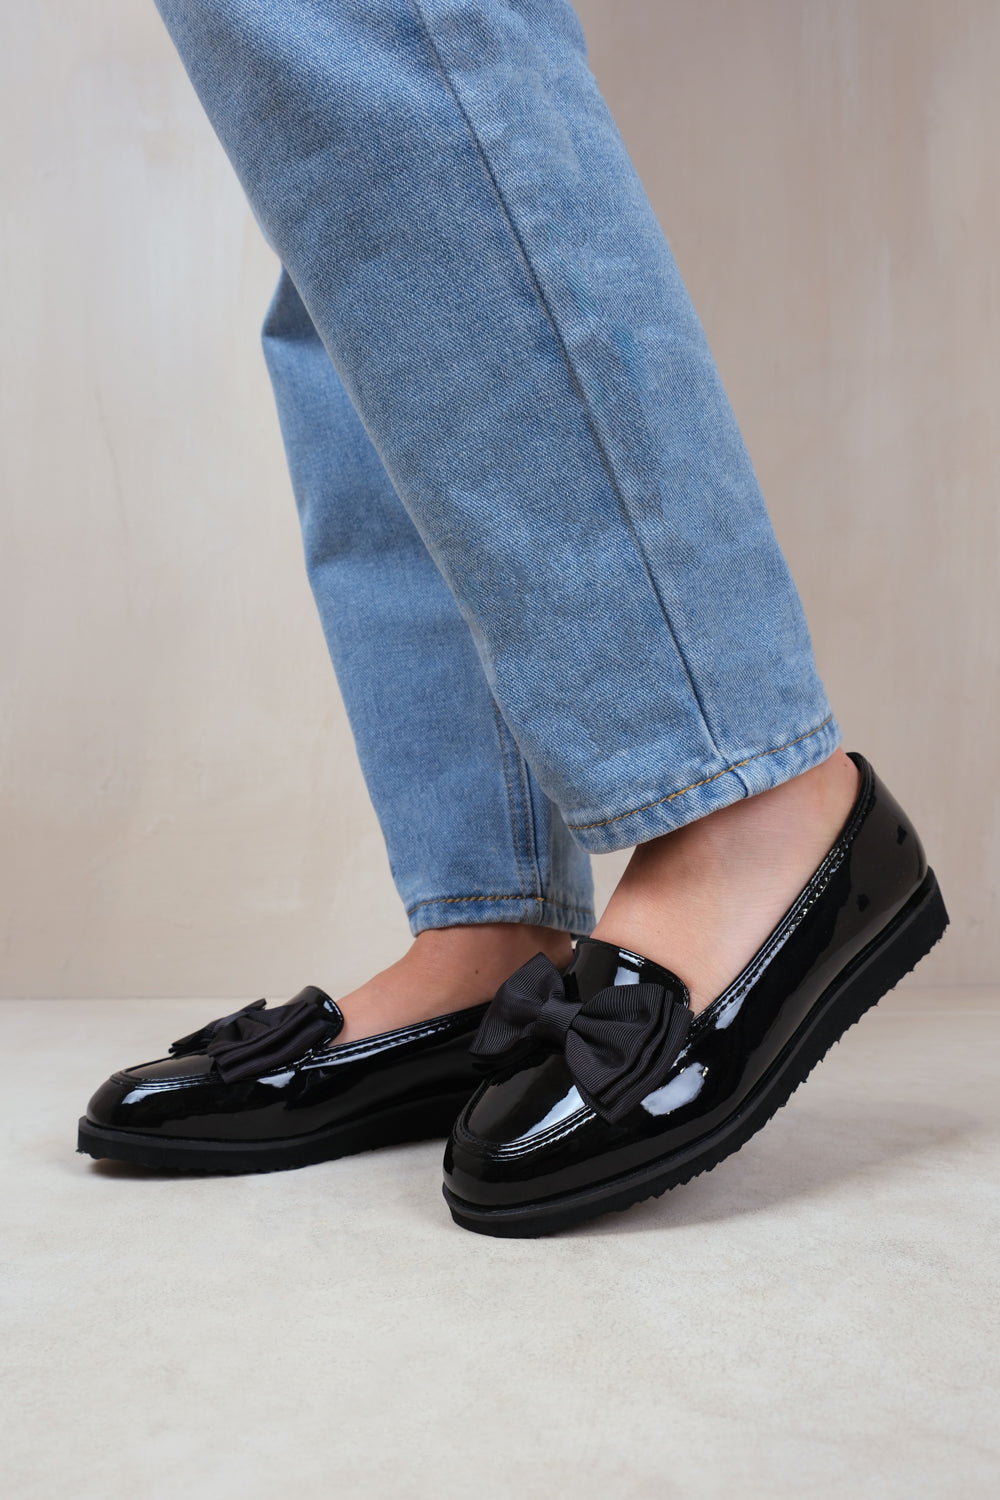 ALPHA SLIP ON LOAFER SLIDER WITH BOW DETAIL IN BLACK PATENT FAUX LEATHER